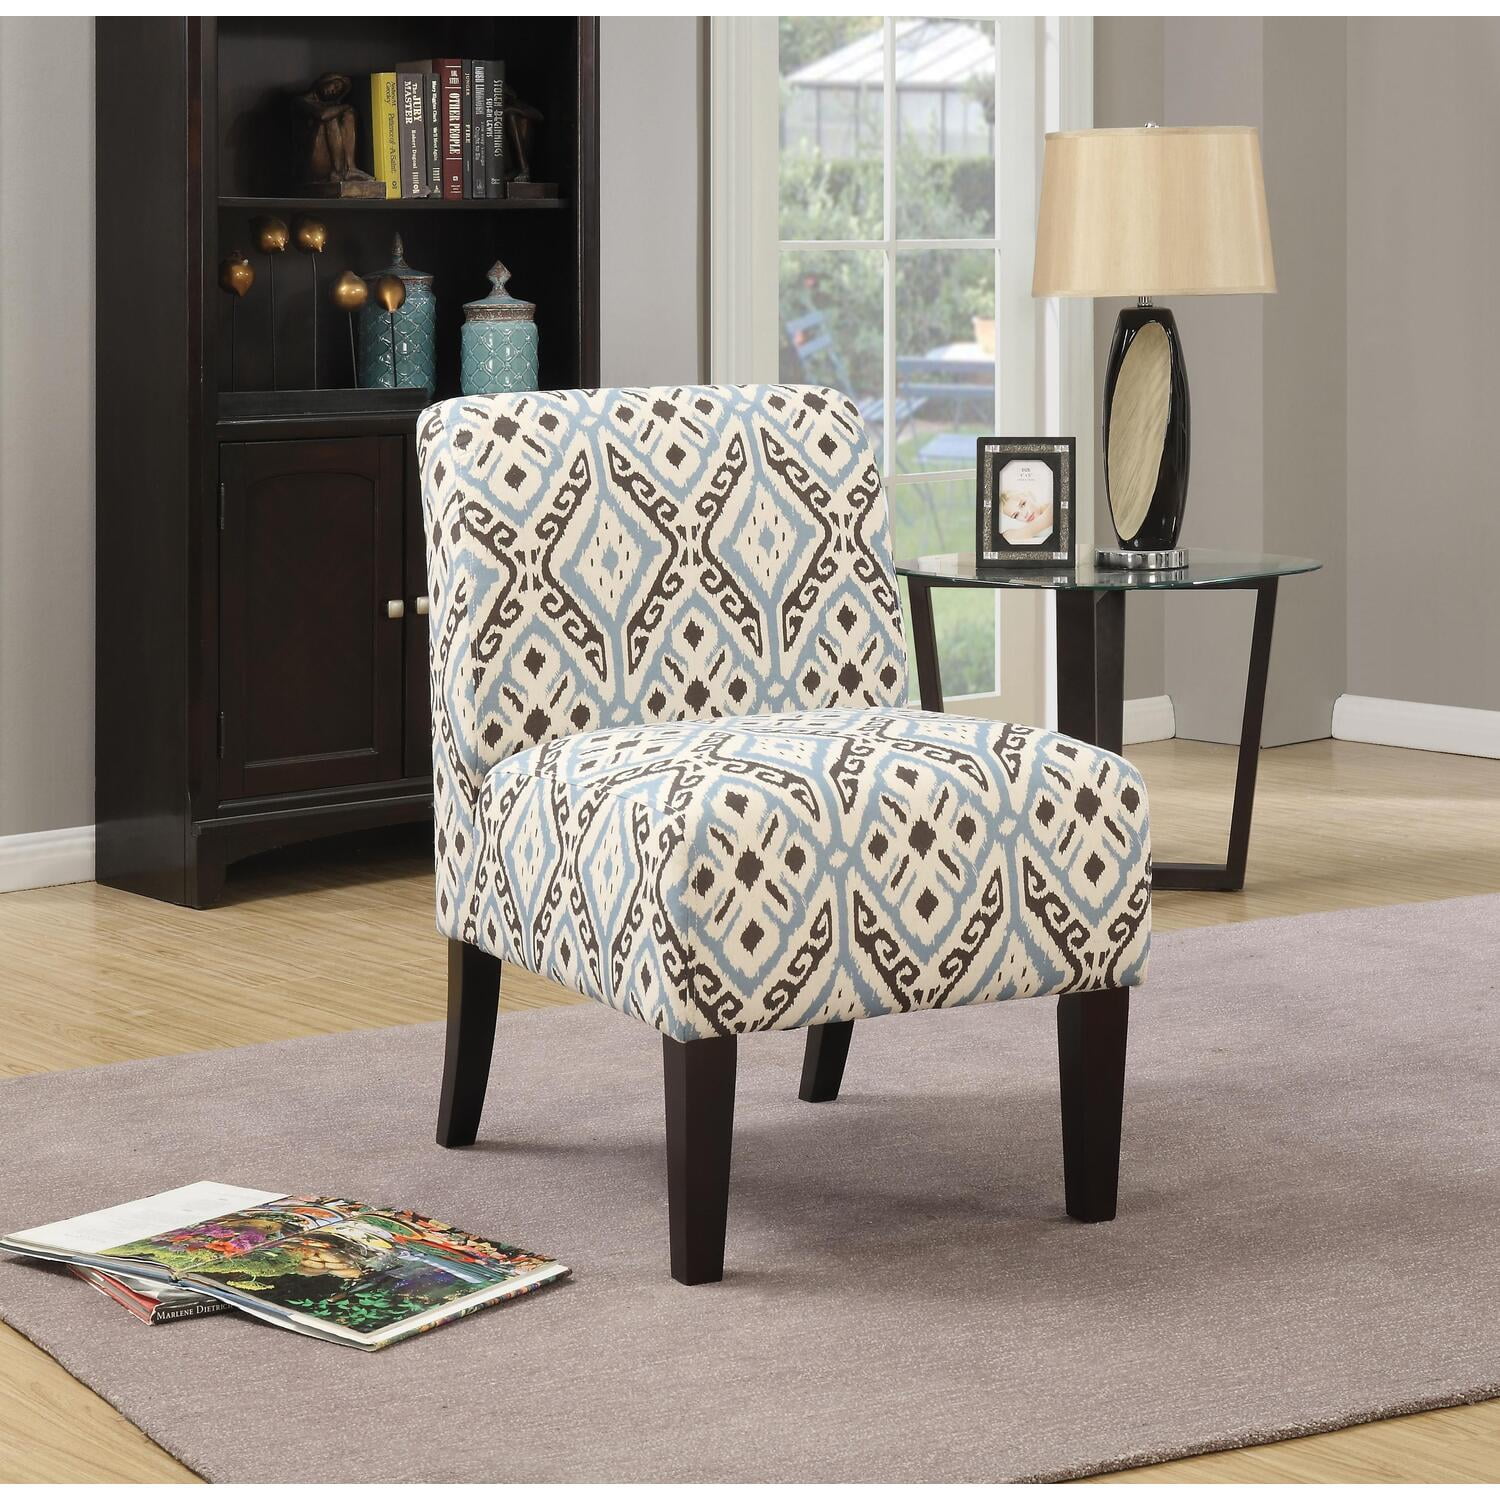 Acme 59437 34 x 31 x 23 in. Ollano Accent Chair, Pattern Fabric - Blue